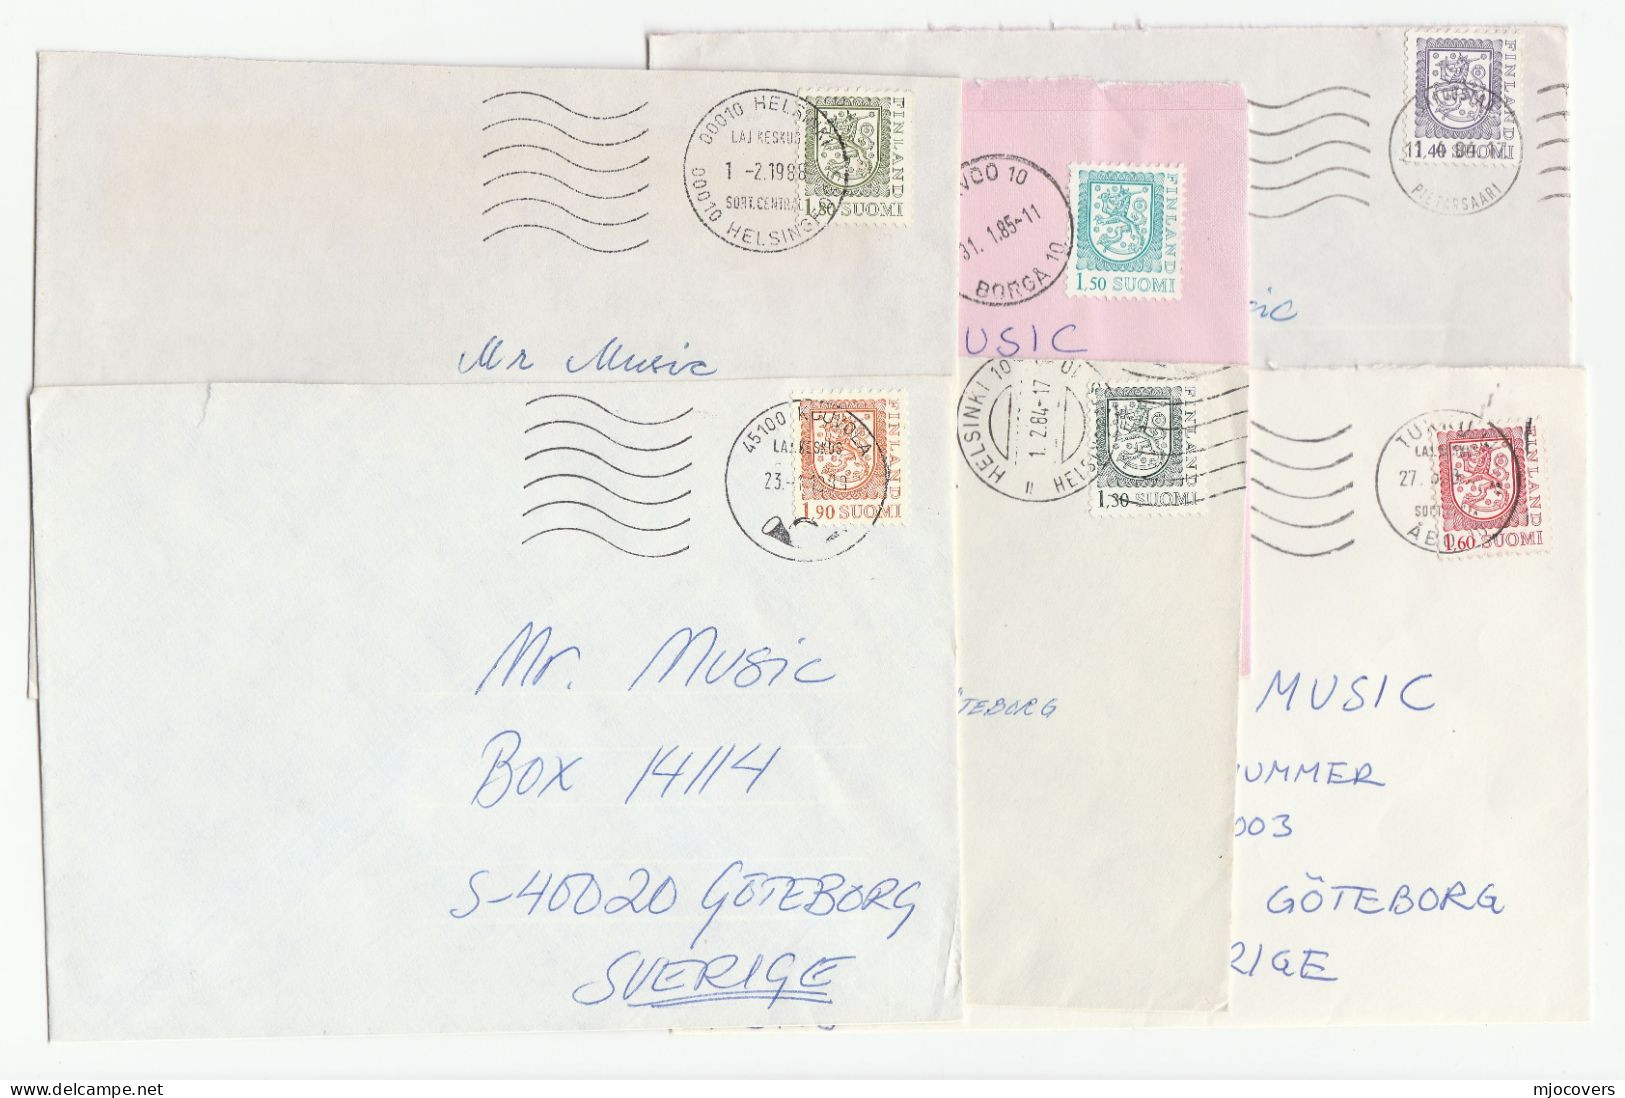 Collection 6 Diff POSTAL RATE Covers 1980s Finland To Sweden, Each Cover Franked A Different Rate Single Stamp - Briefe U. Dokumente